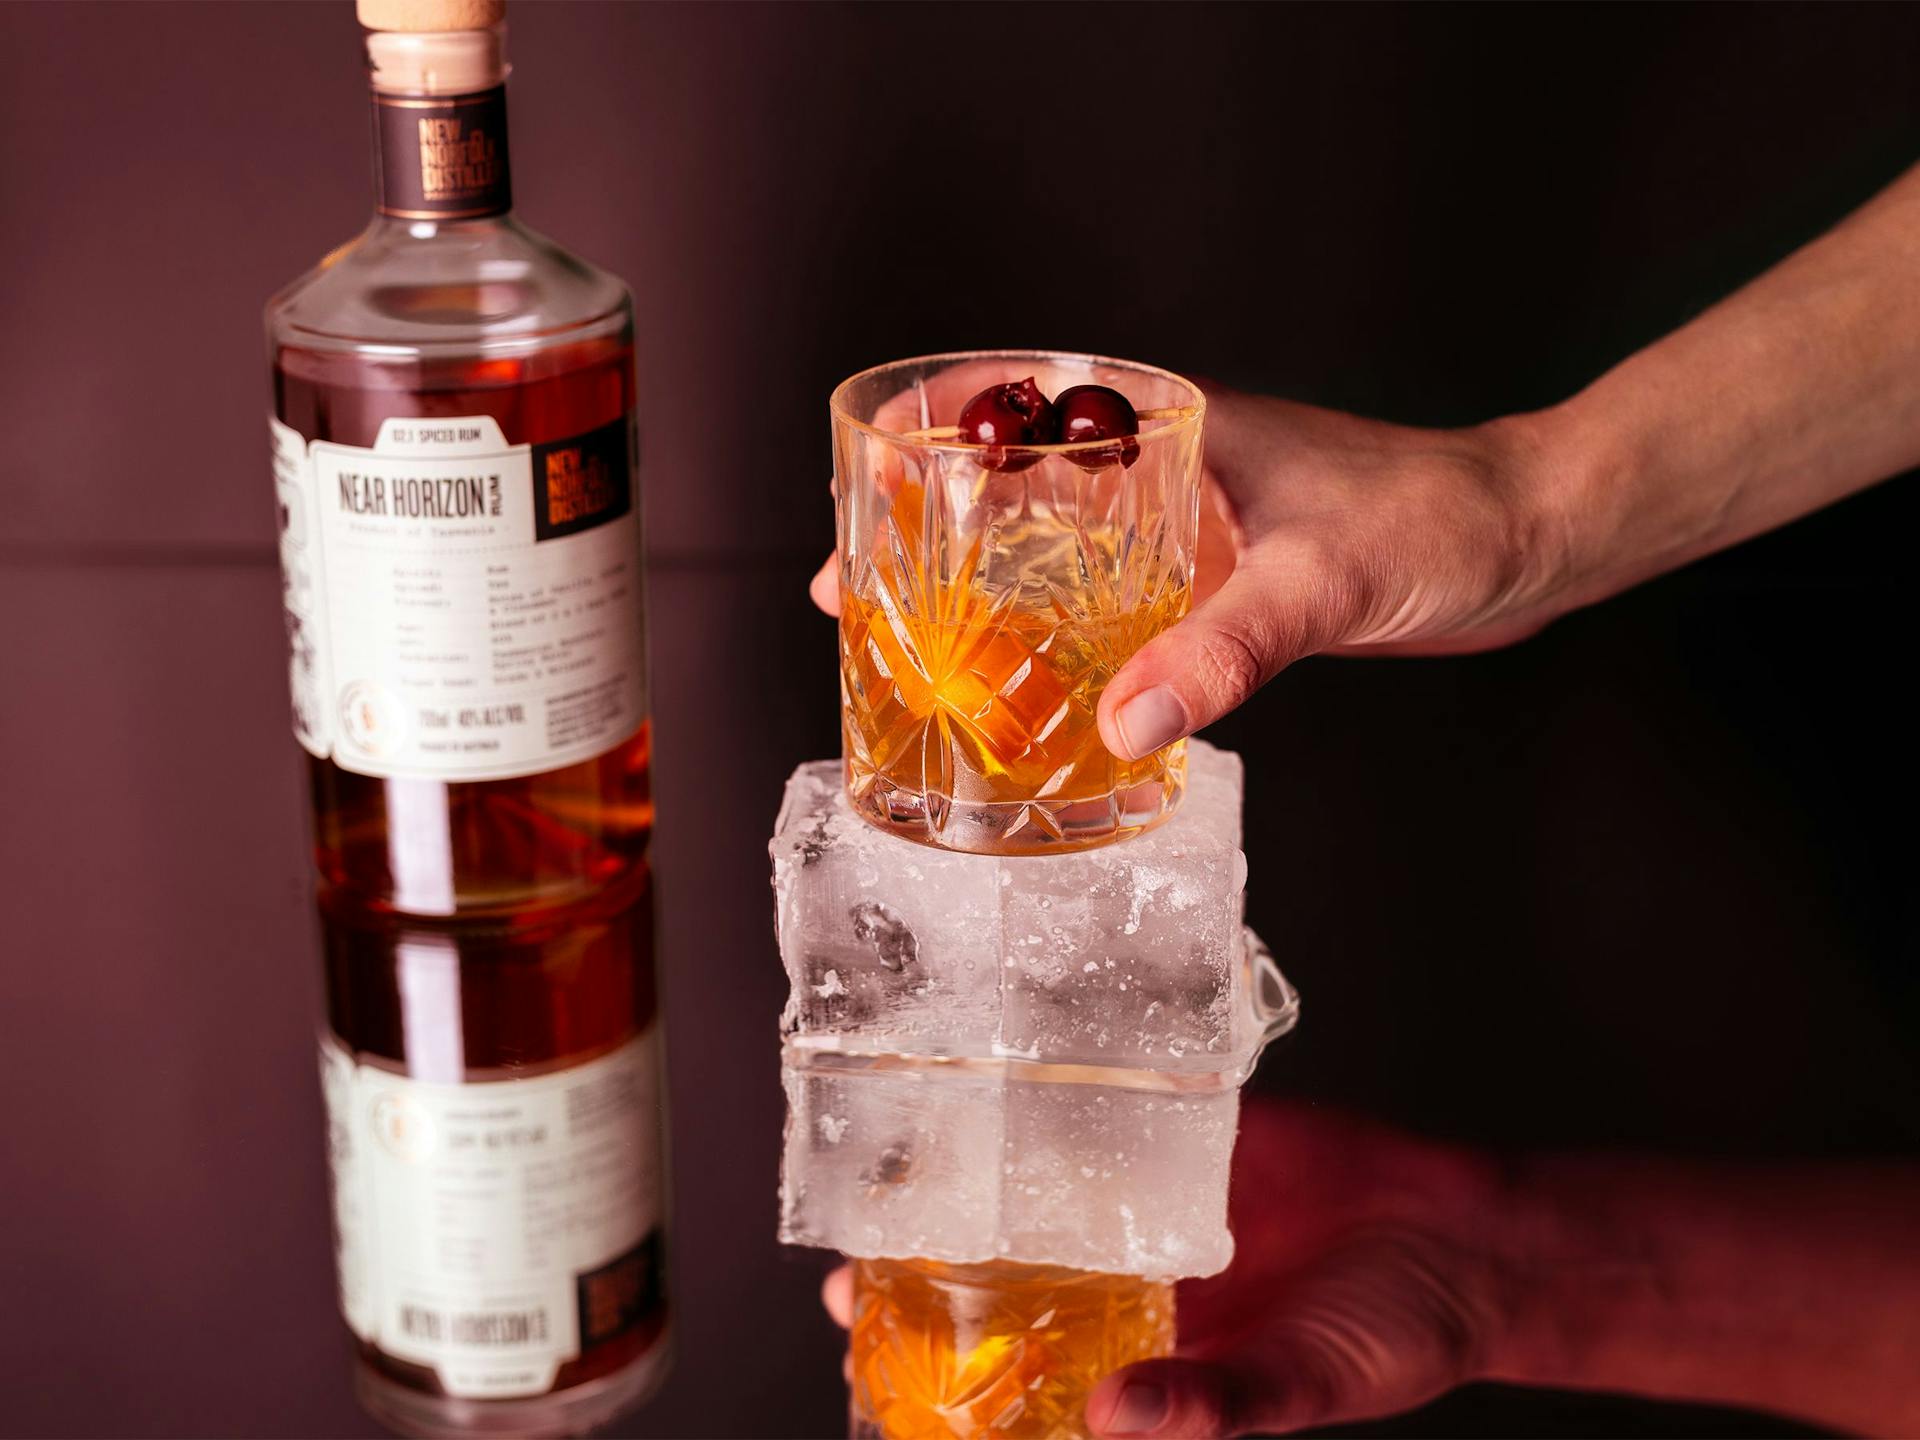 A bottle of Near Horizon rum sits behind a glass resting atop a big ice cube. The whole scene is being reflected on a mirrored surface